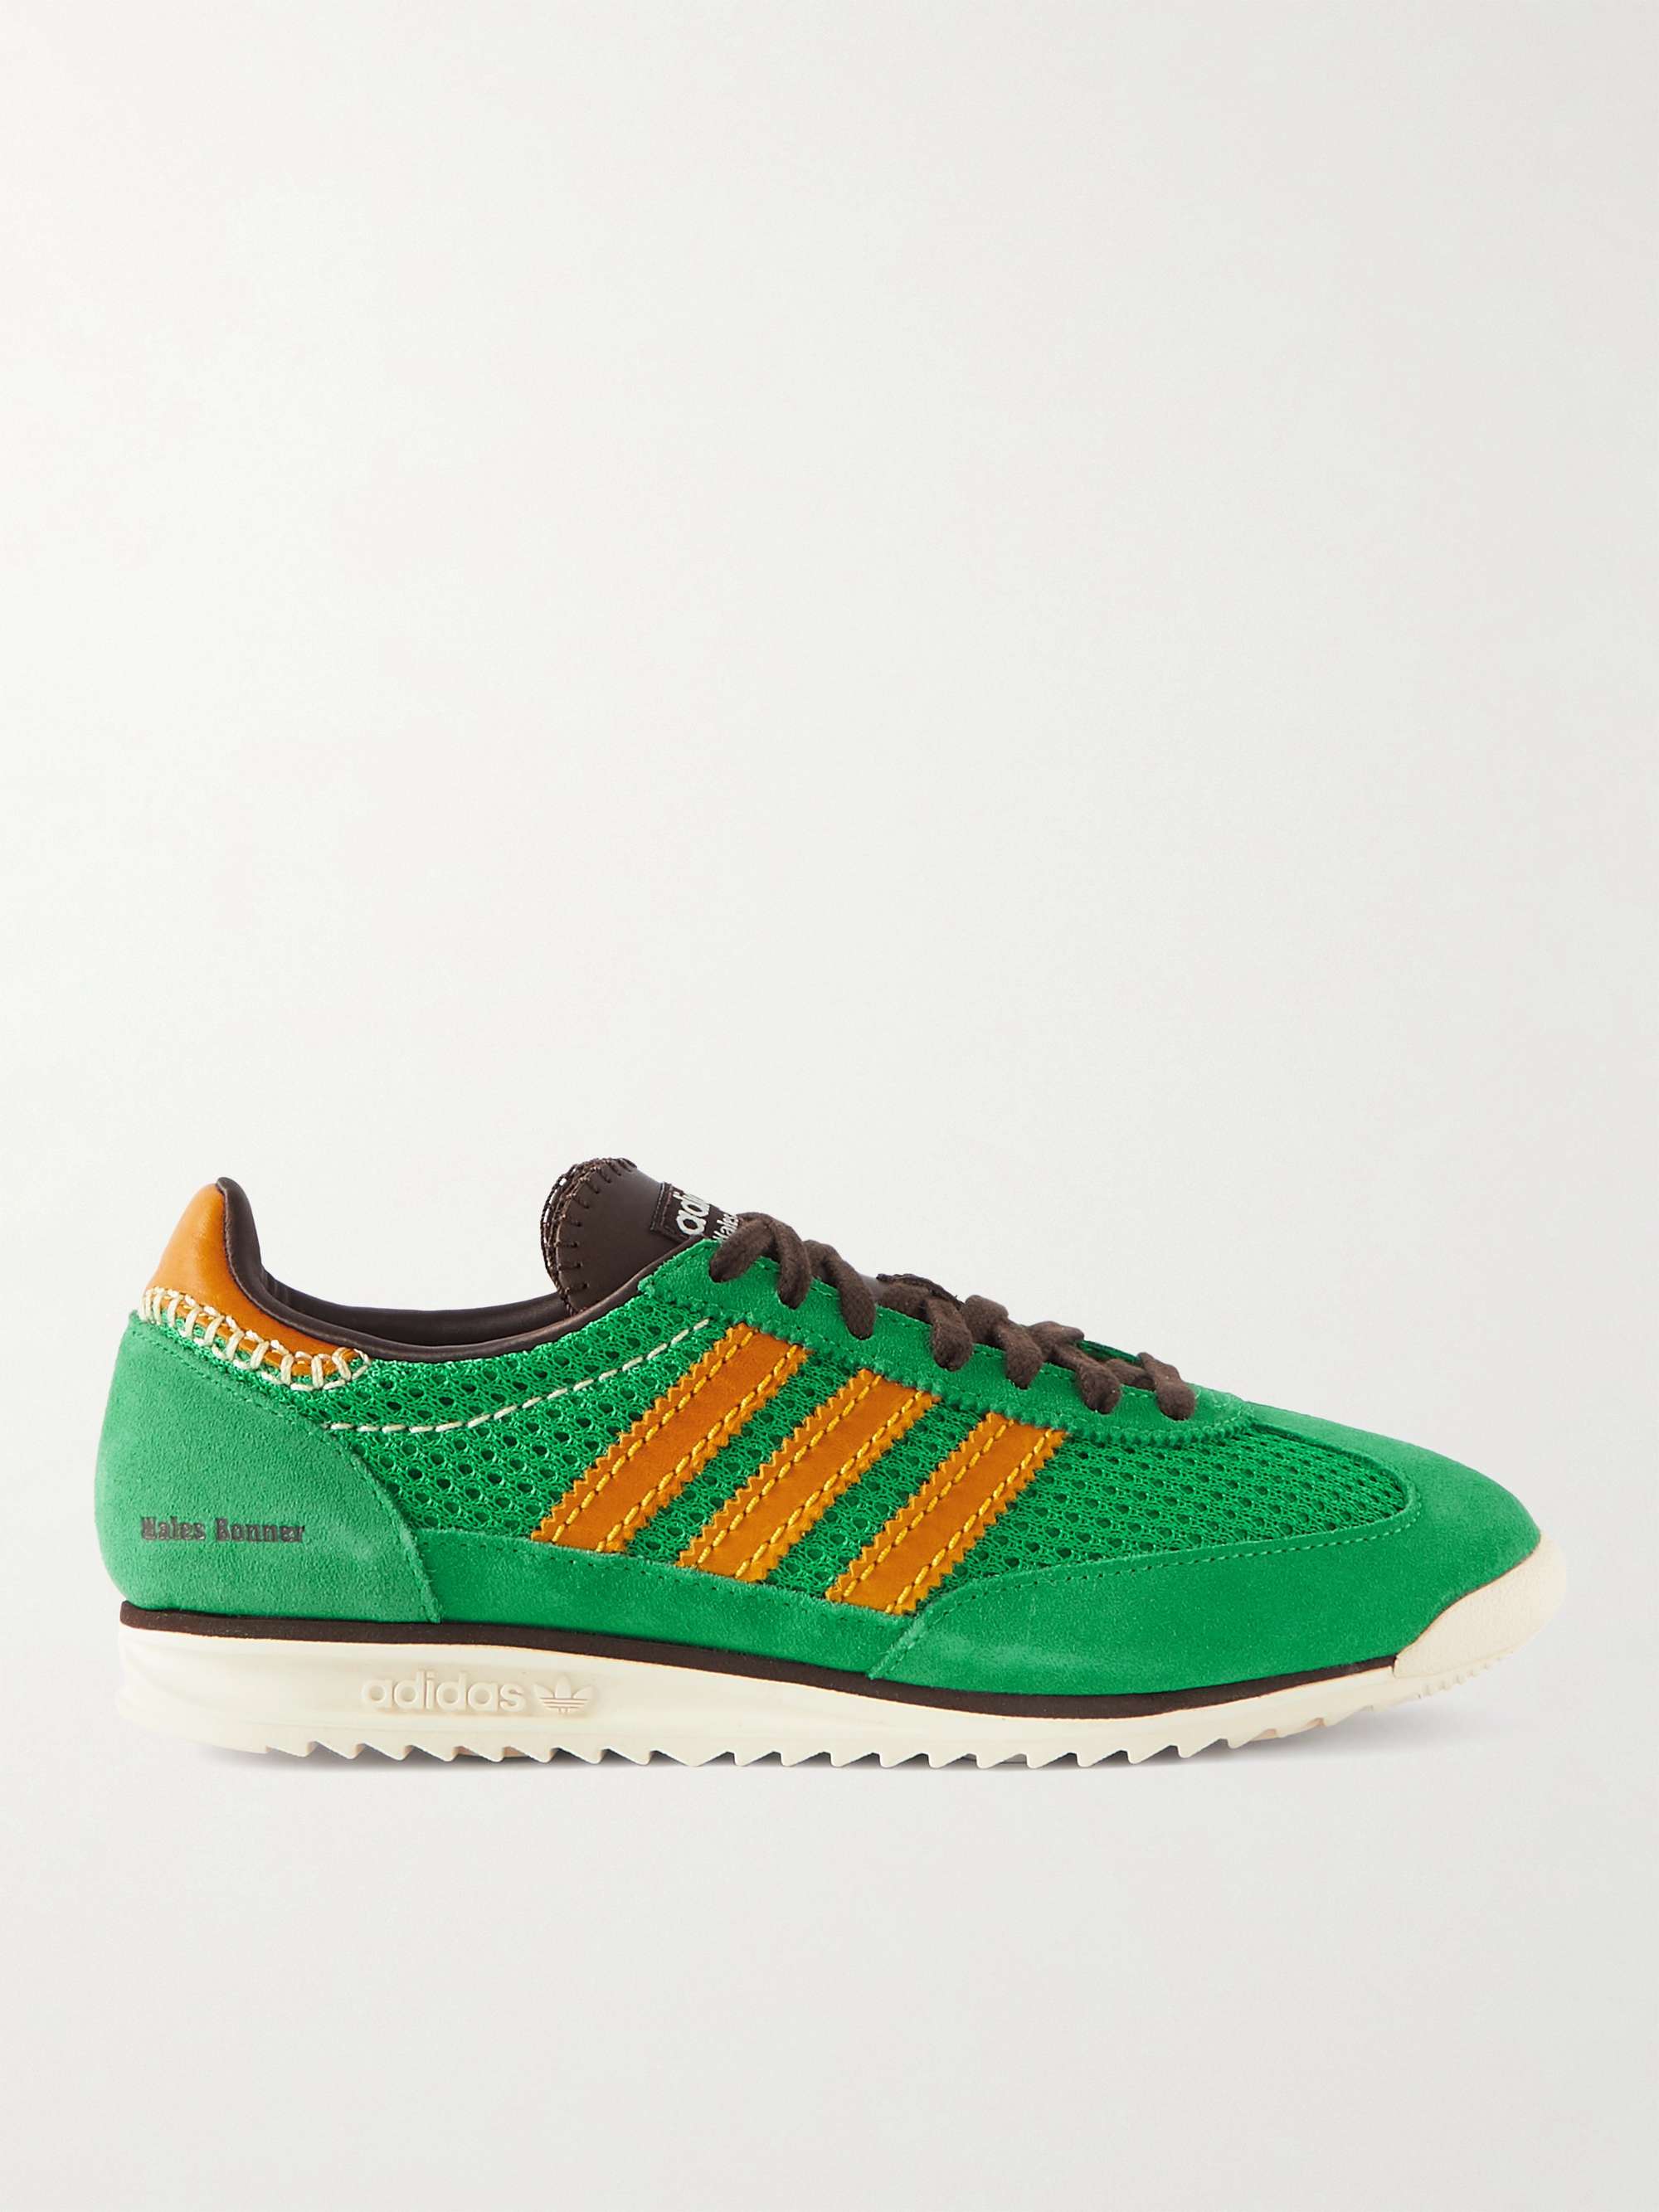 ADIDAS + Wales Bonner Suede and Mesh | MR PORTER